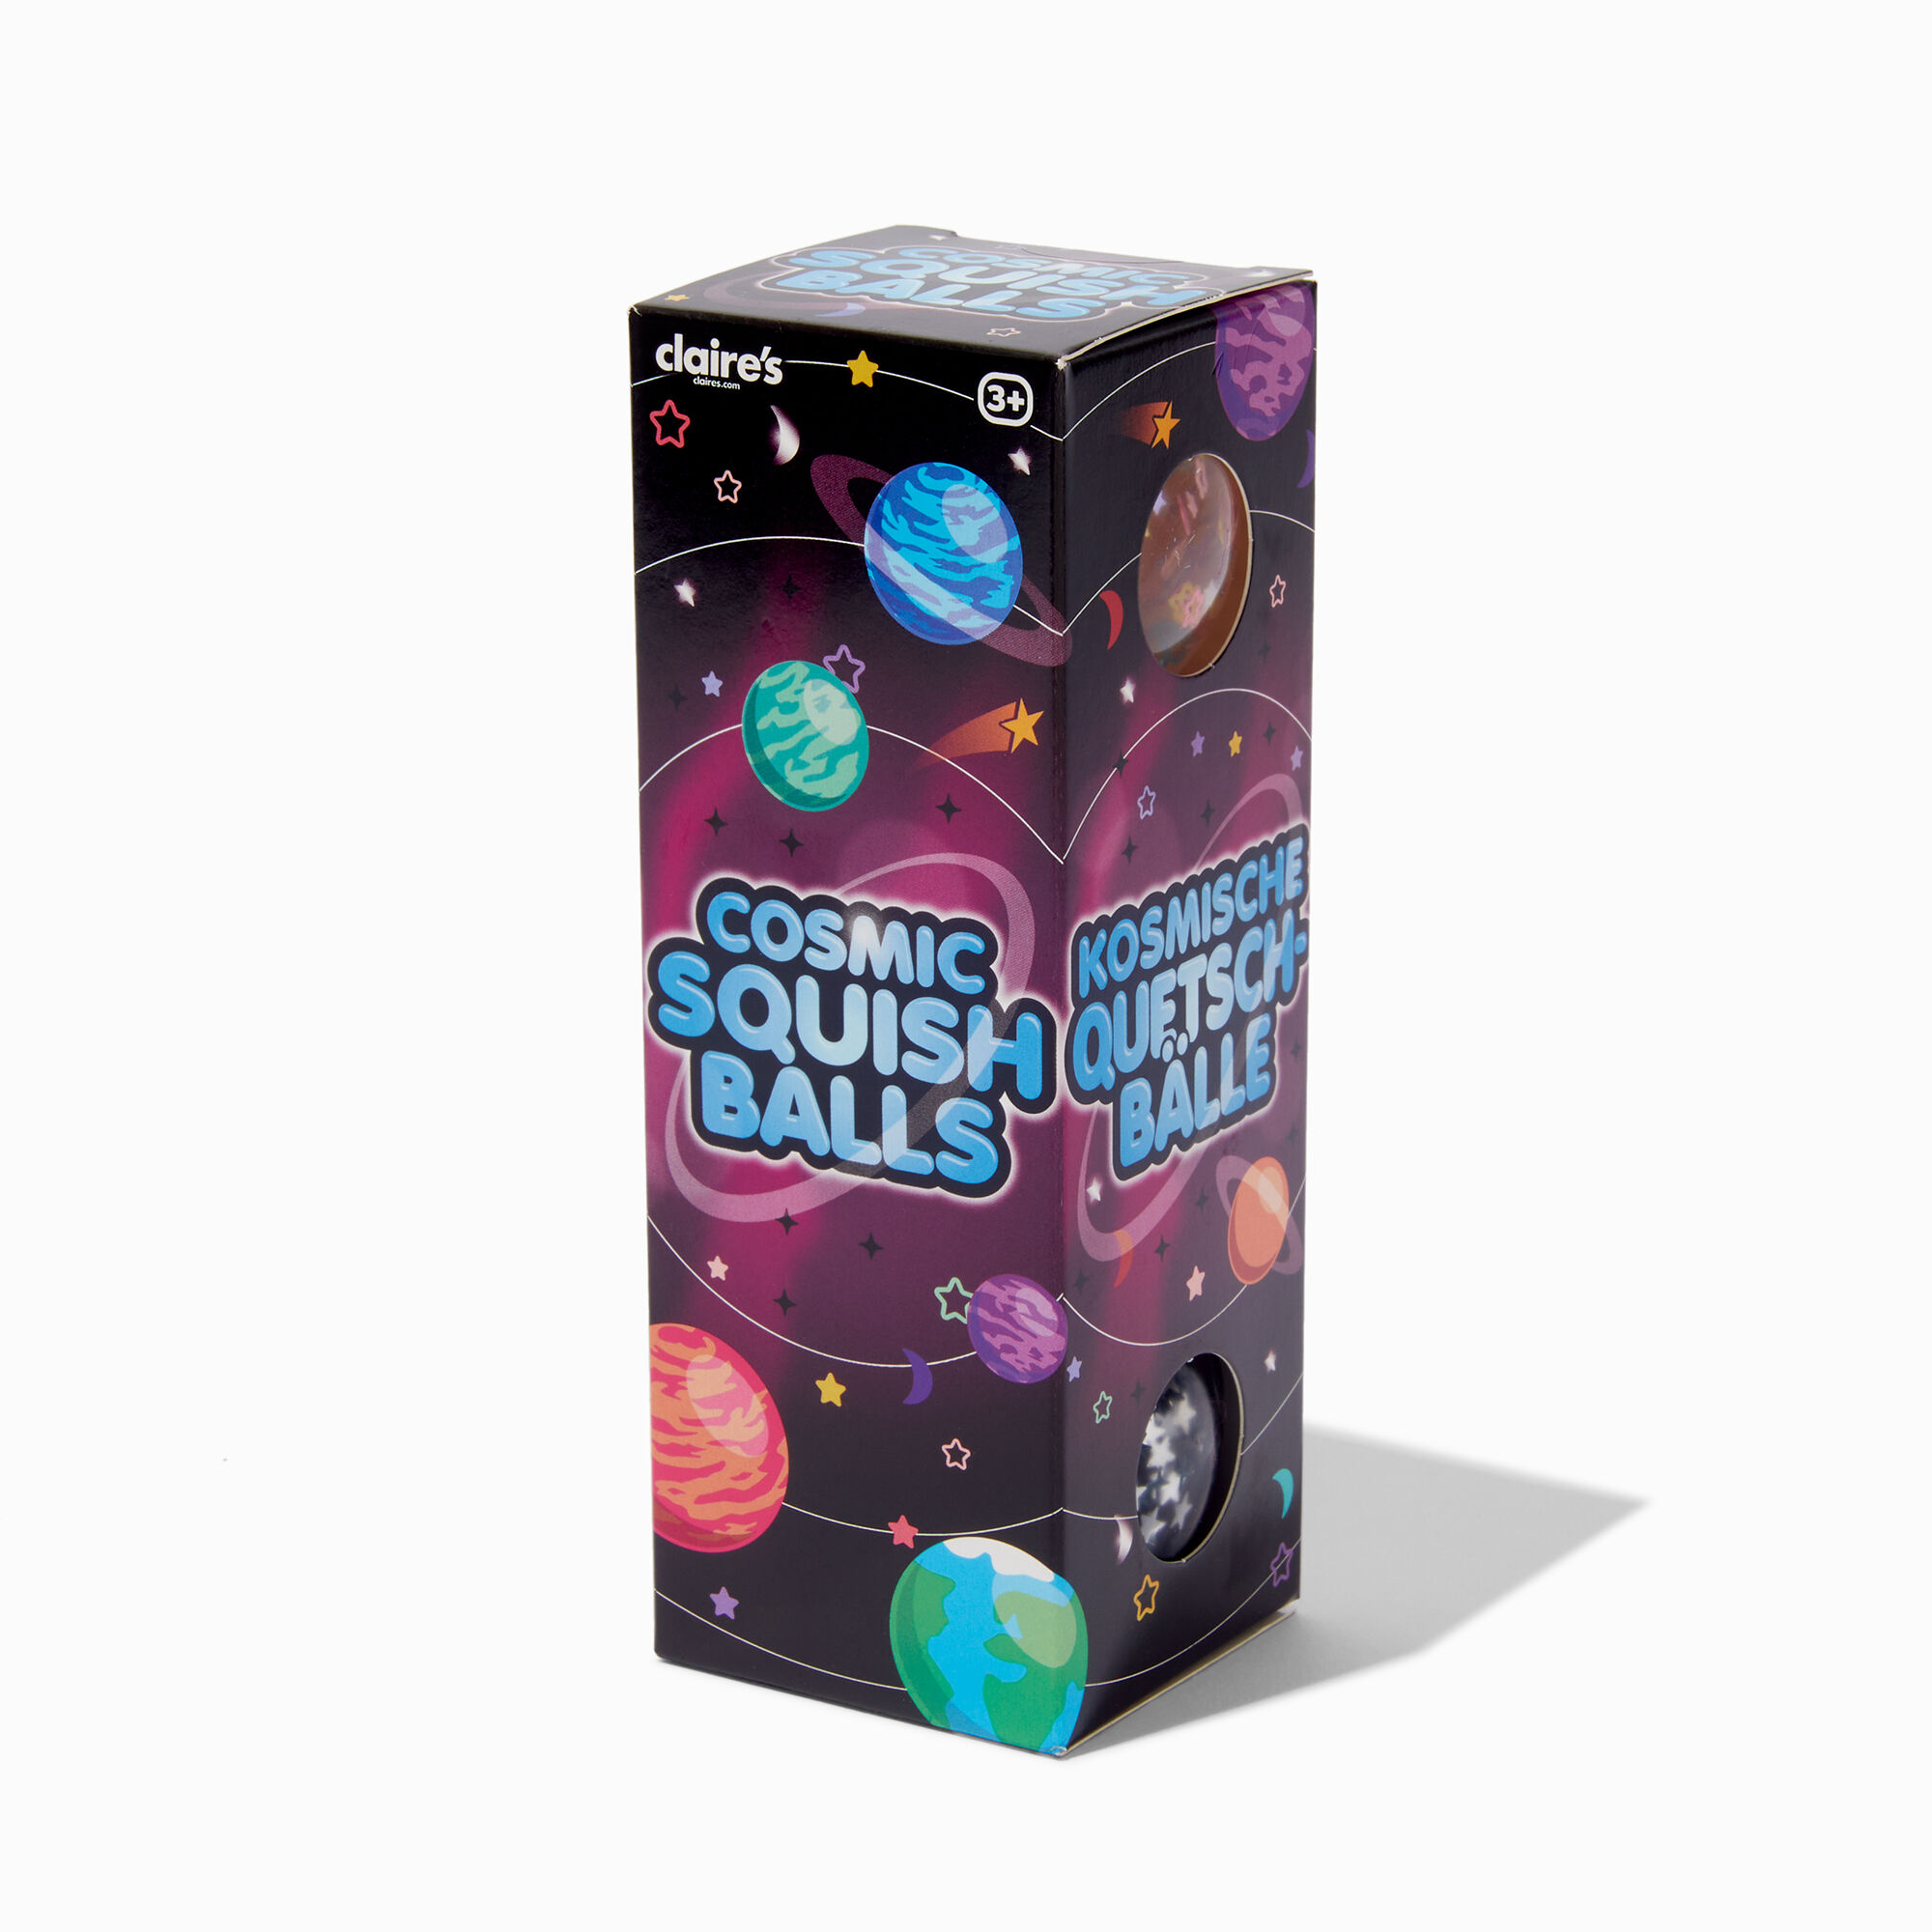 View Claires Cosmic Squish Balls 3 Pack information